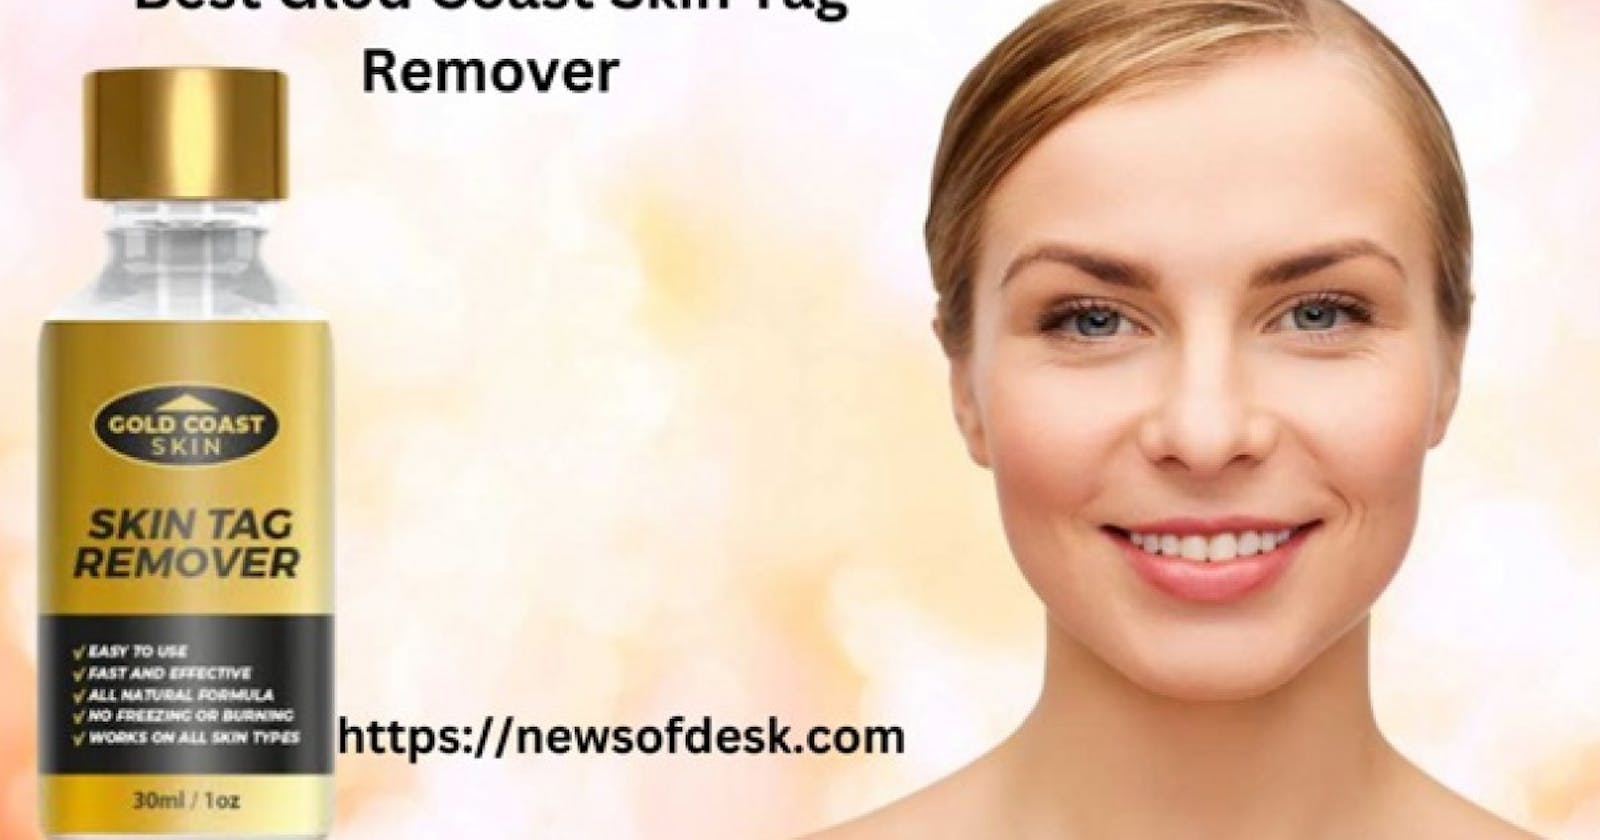 Gold Coast Skin Tag Remover (Scam or Legit) – Don’t Buy Till You Read!